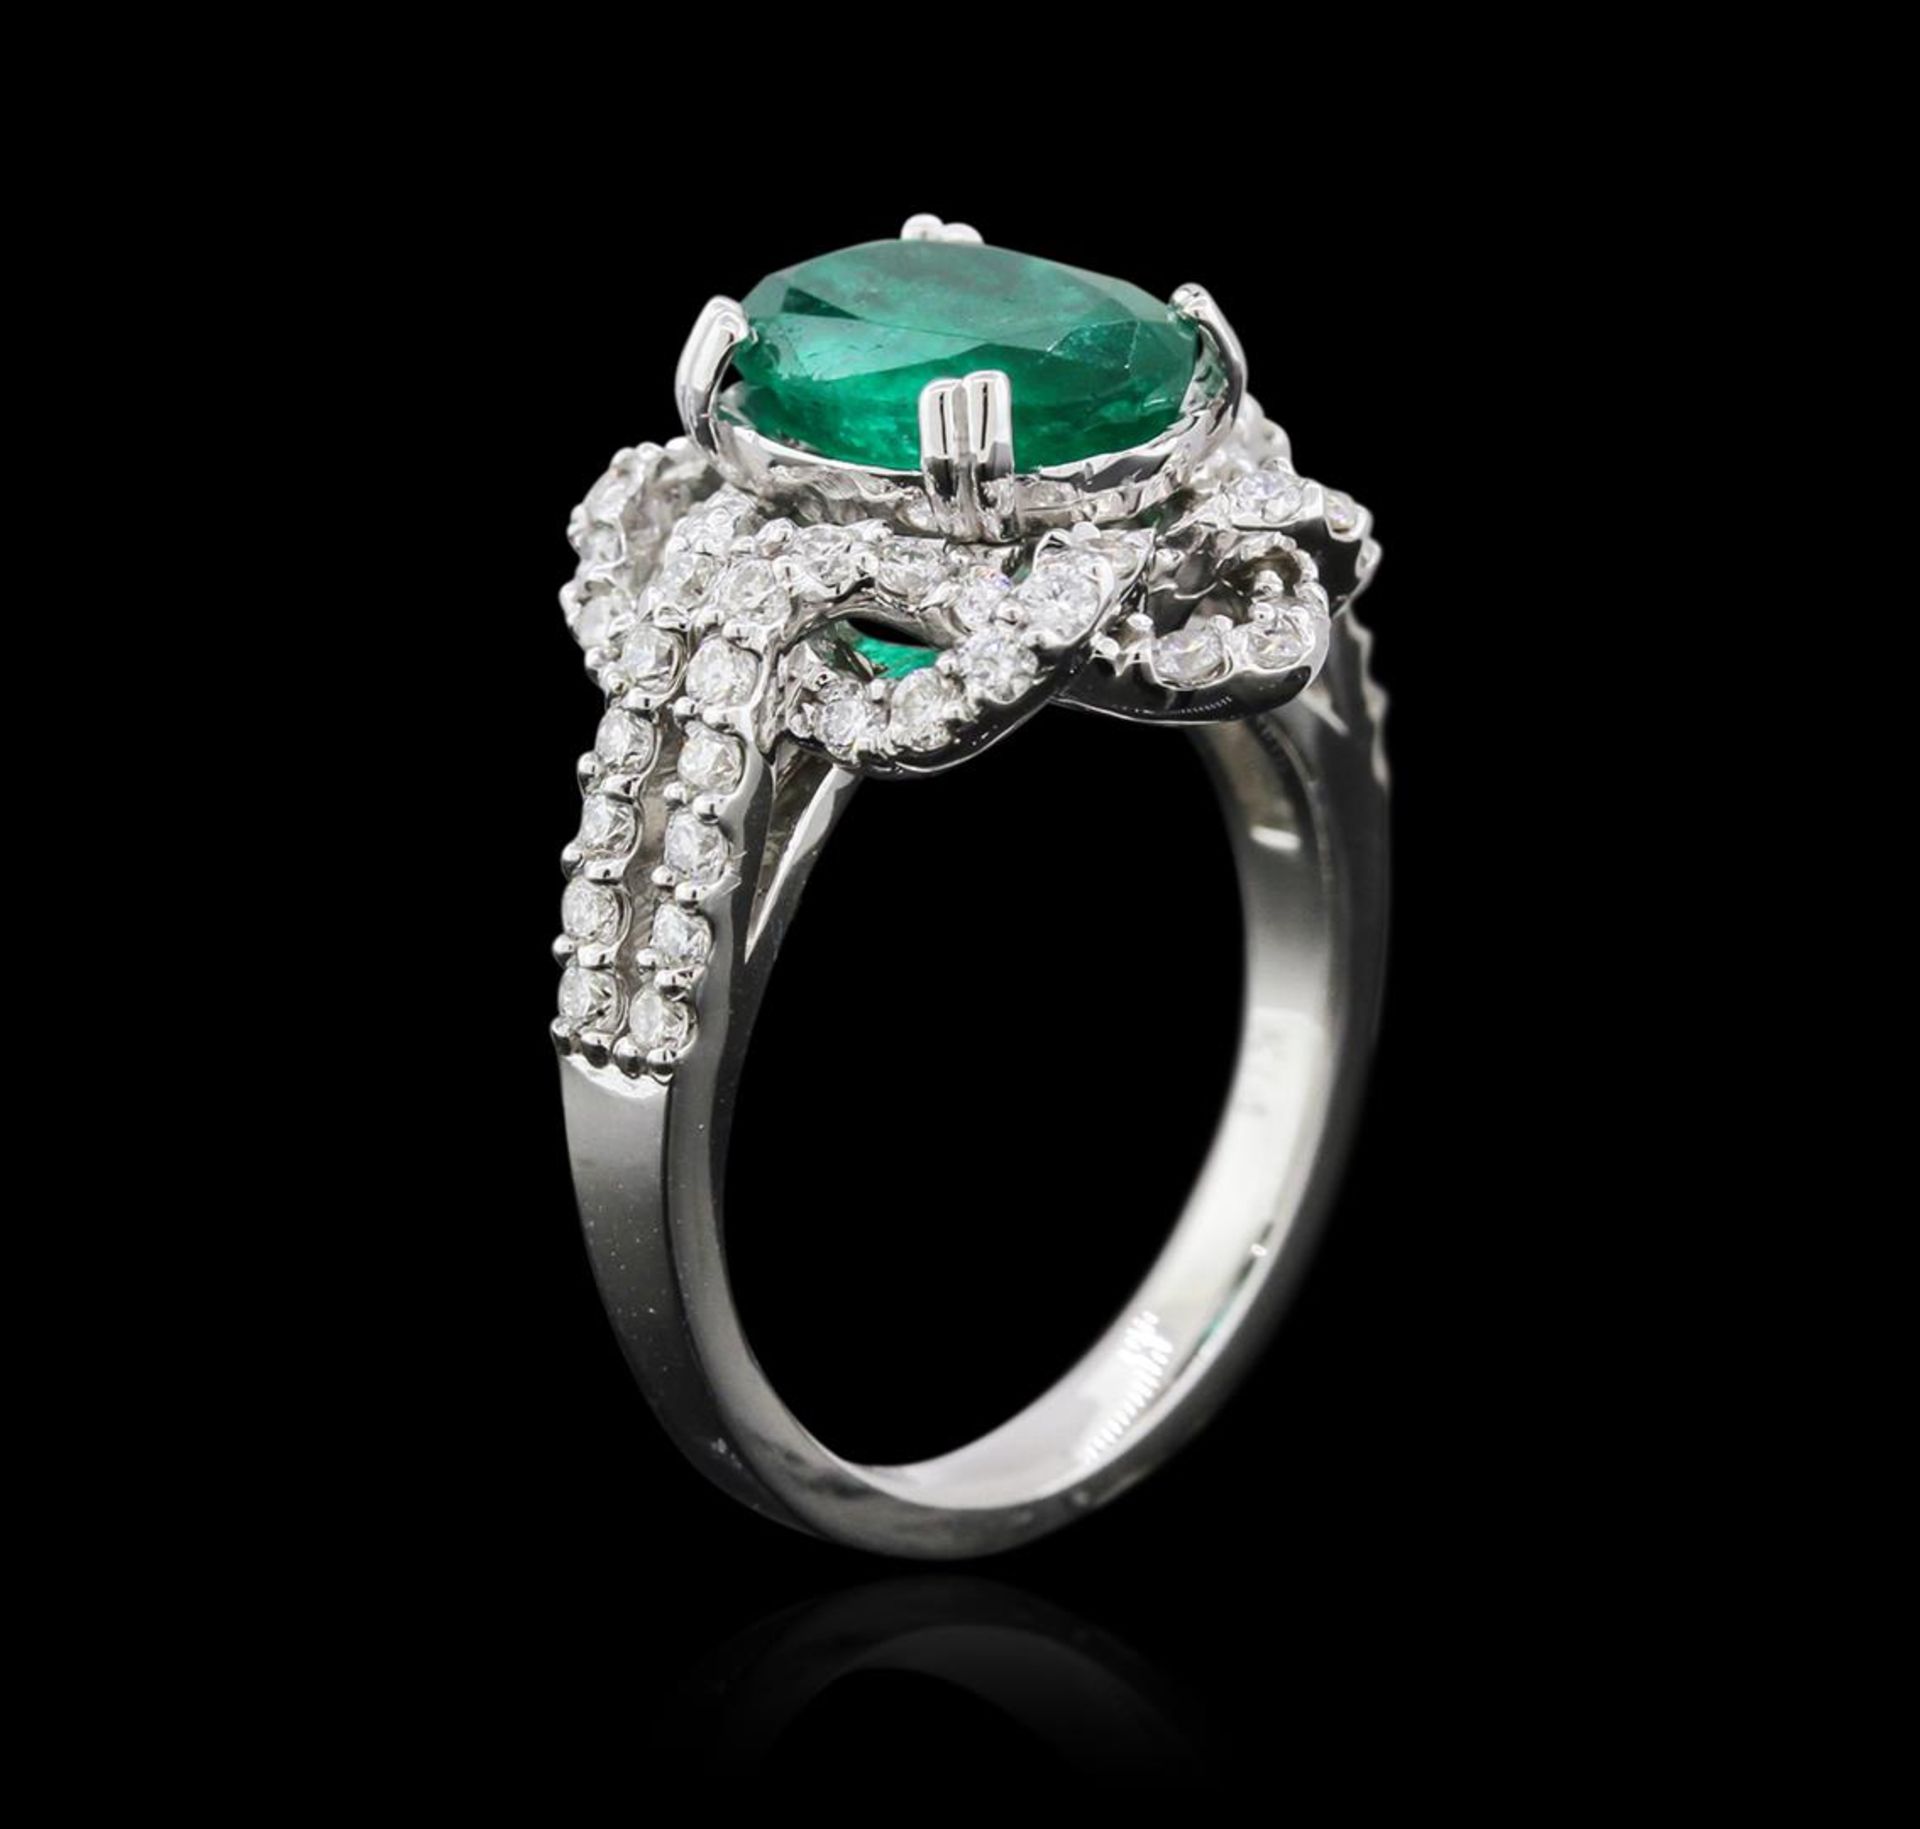 14KT White Gold 2.30 ctw Emerald and Diamond Ring - Image 3 of 4